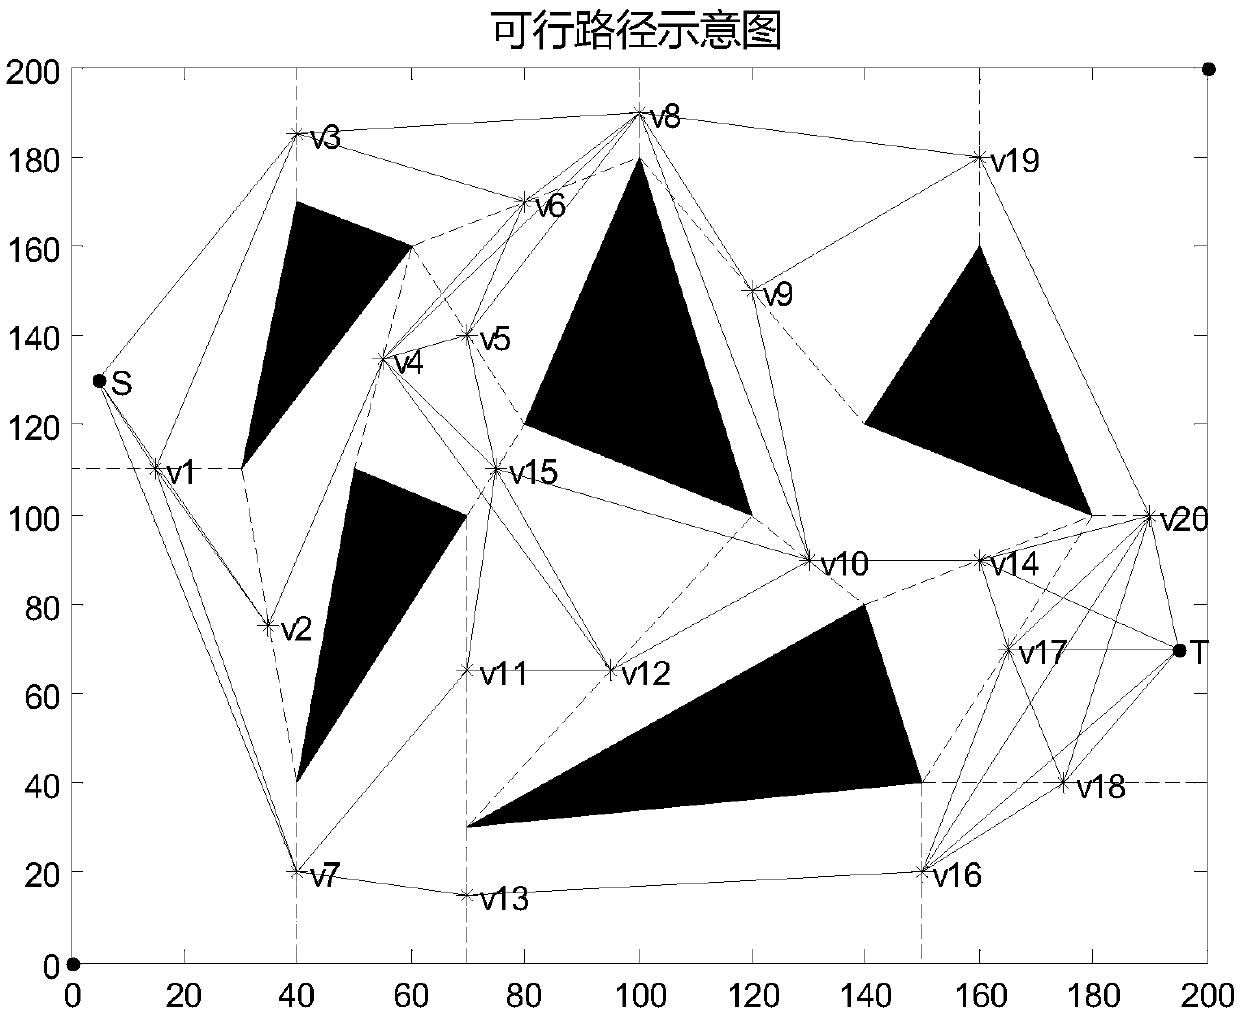 A high-speed rail path planning and designing method based on a maklink graph multi-node link